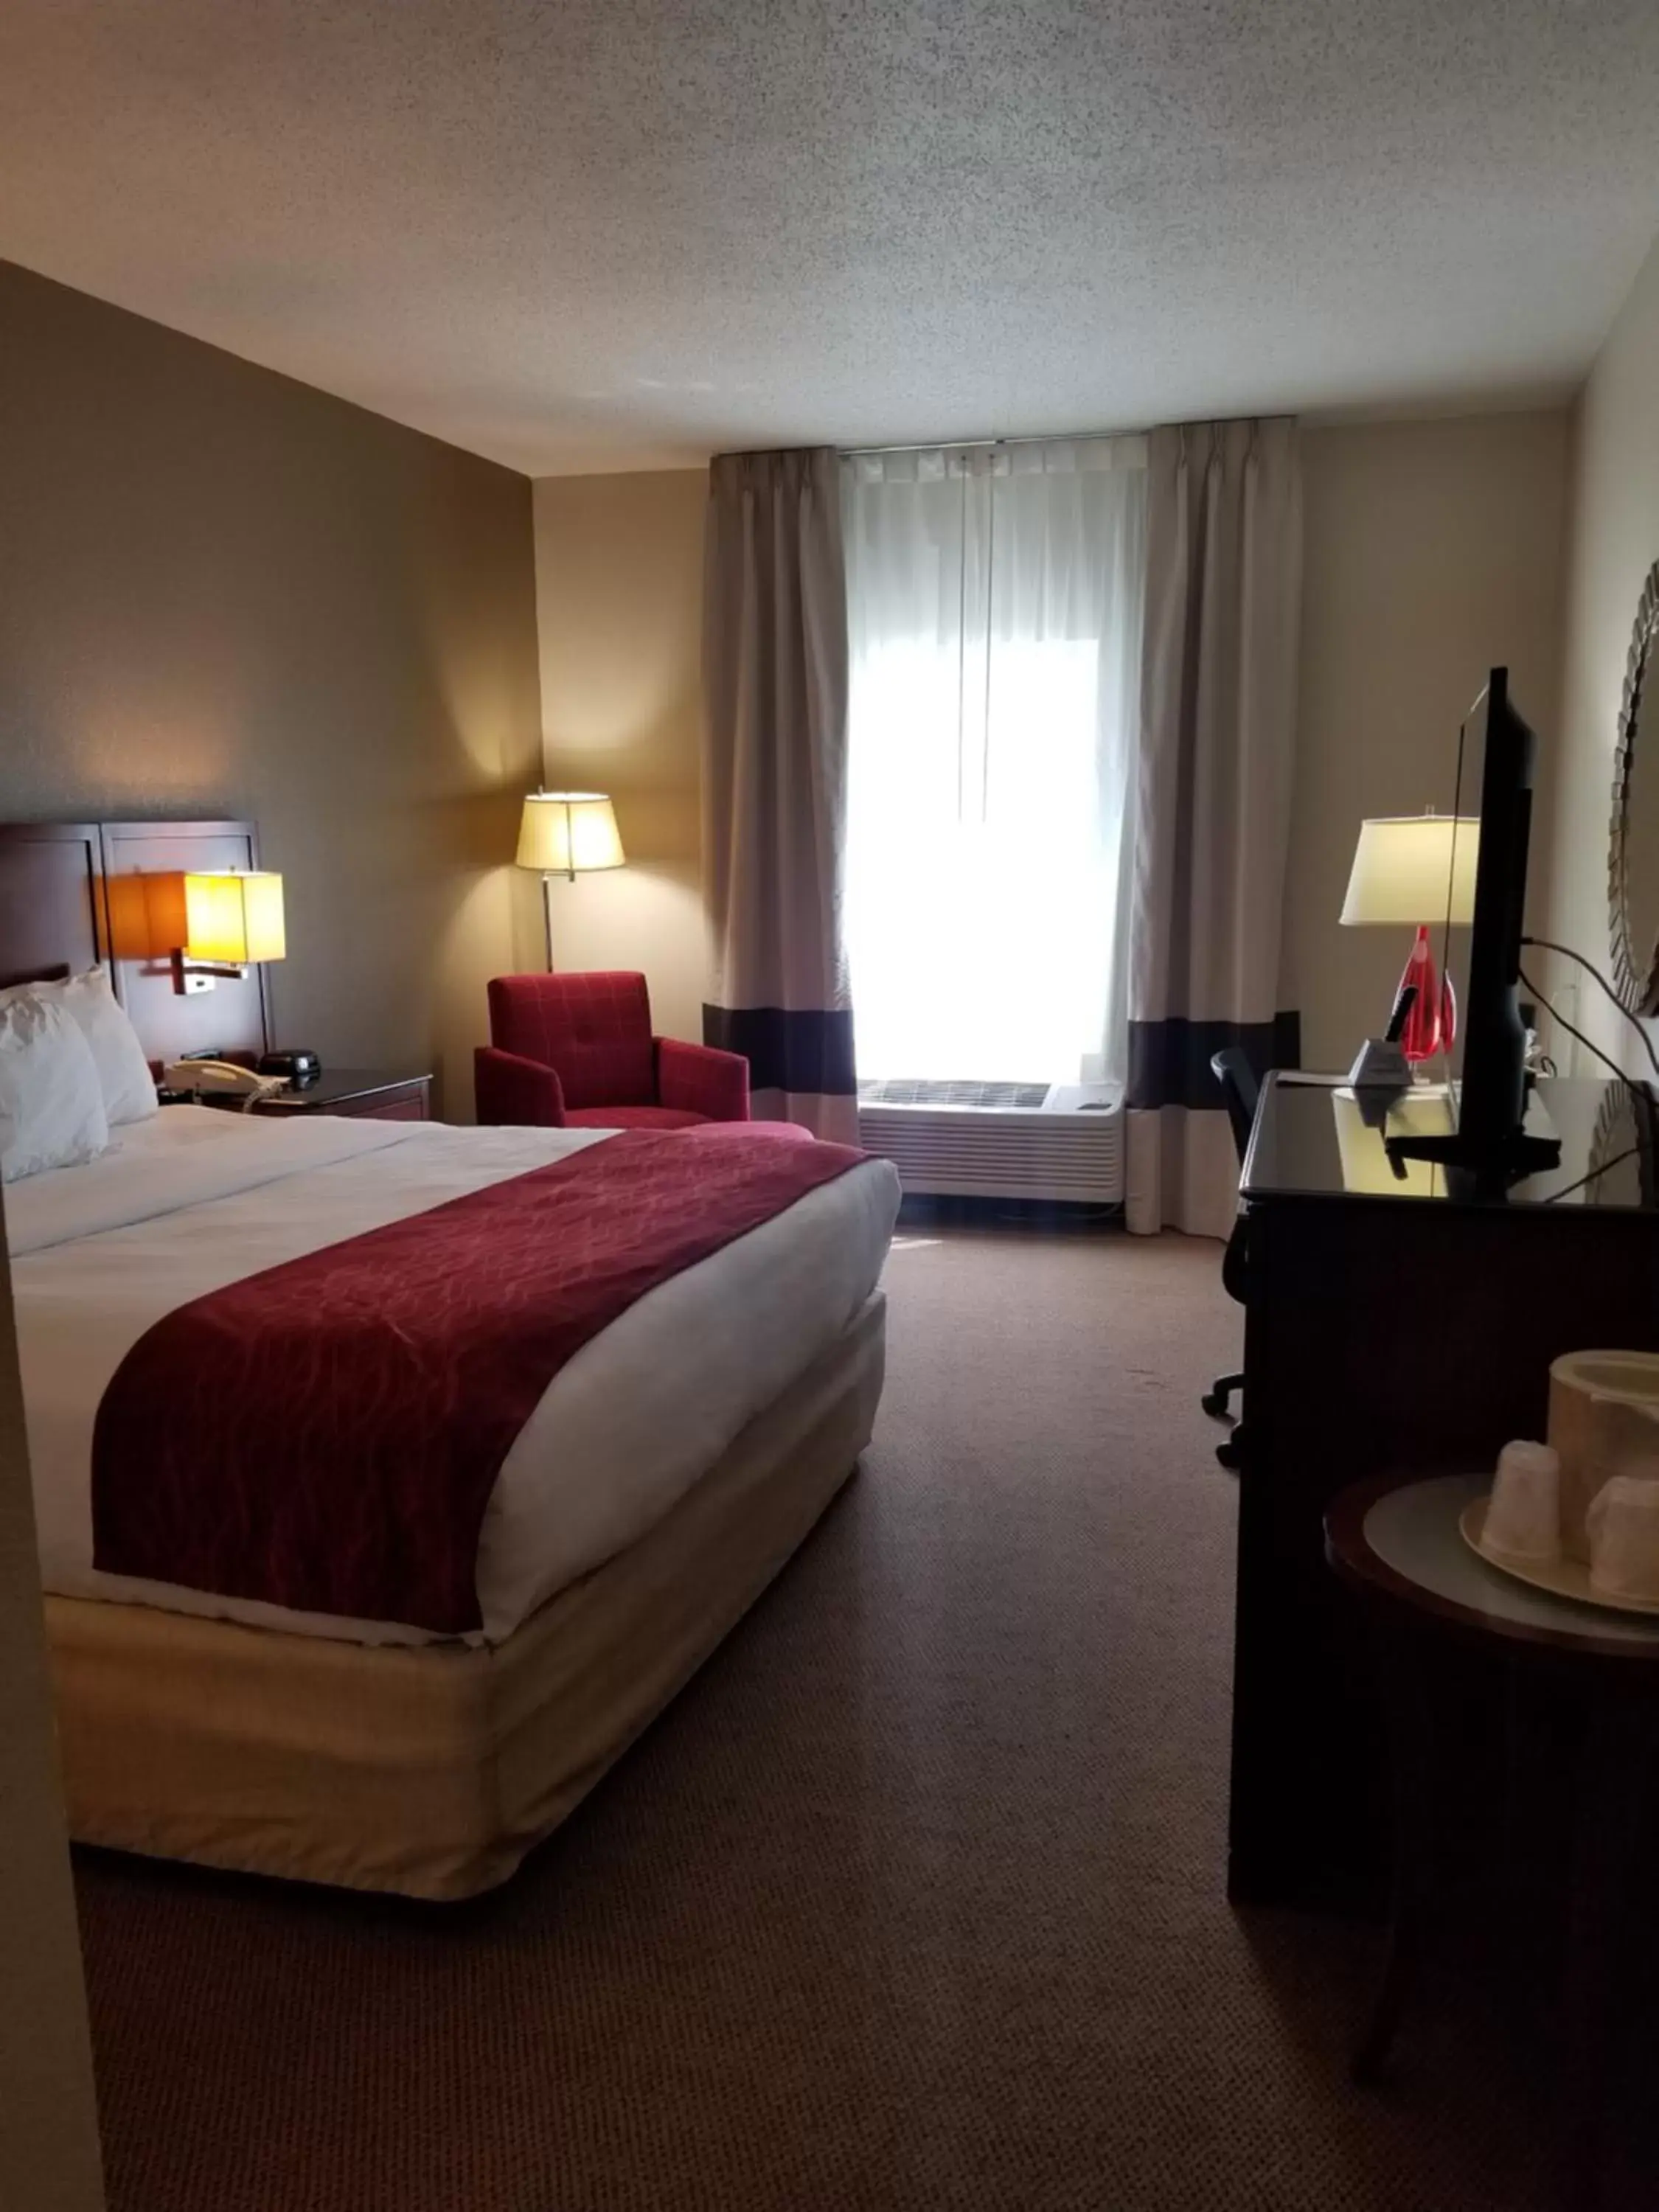 King Room - Accessible/Non-Smoking in Comfort Inn & Suites Geneva- West Chicago